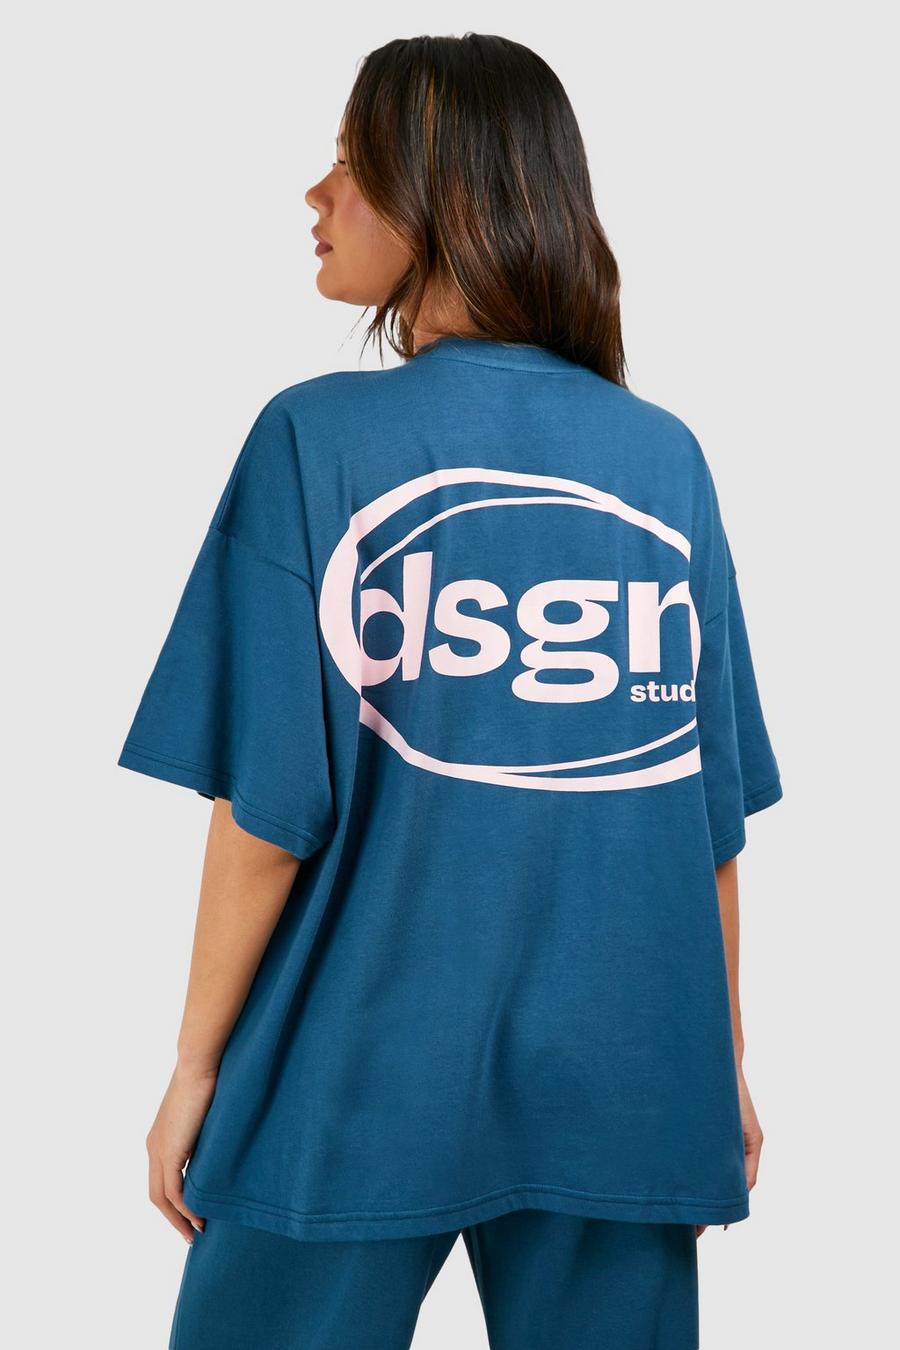 T-shirt oversize con stampa Dsgn Studio, Teal